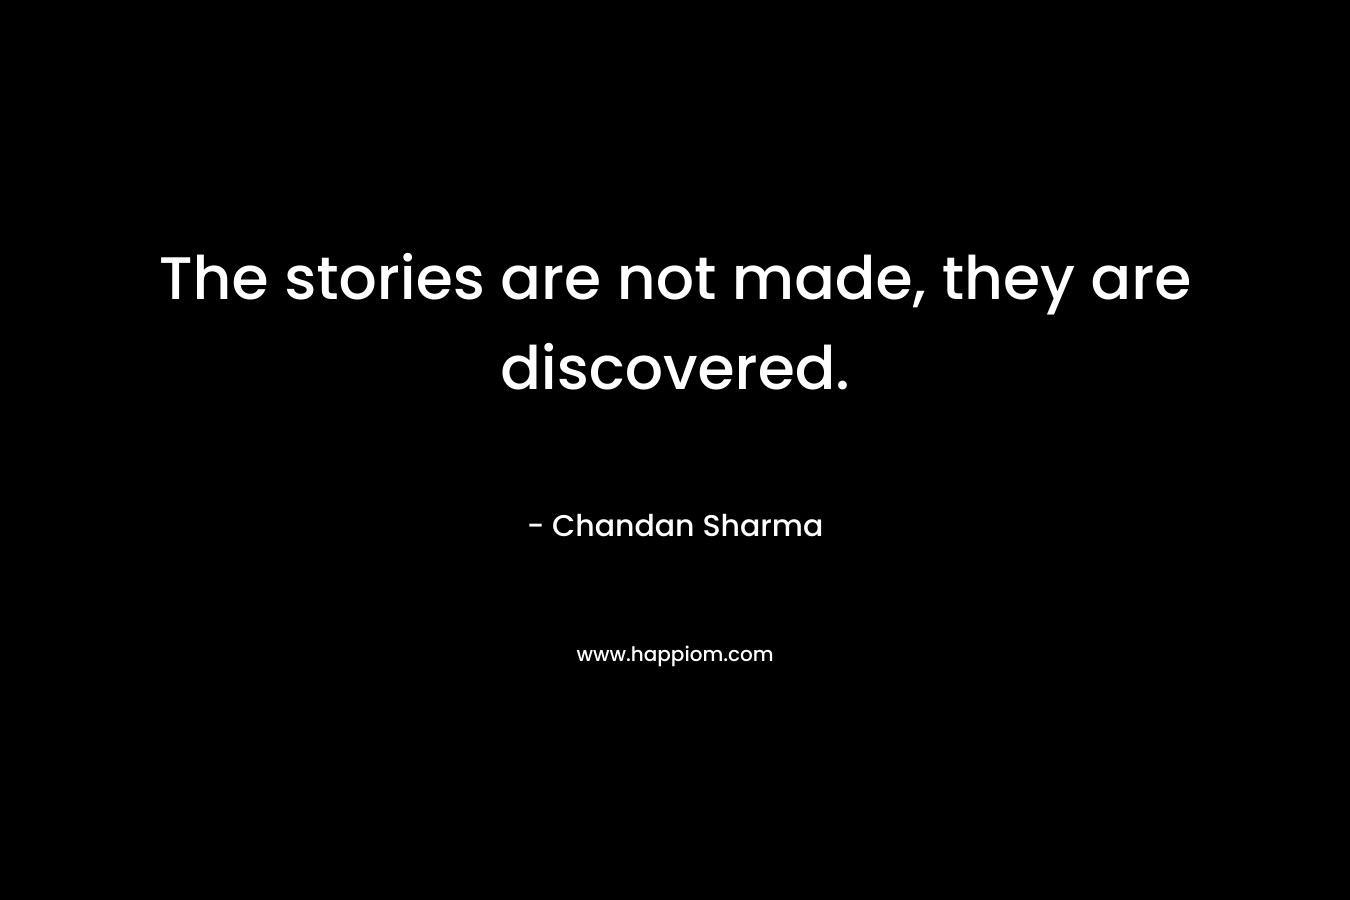 The stories are not made, they are discovered.